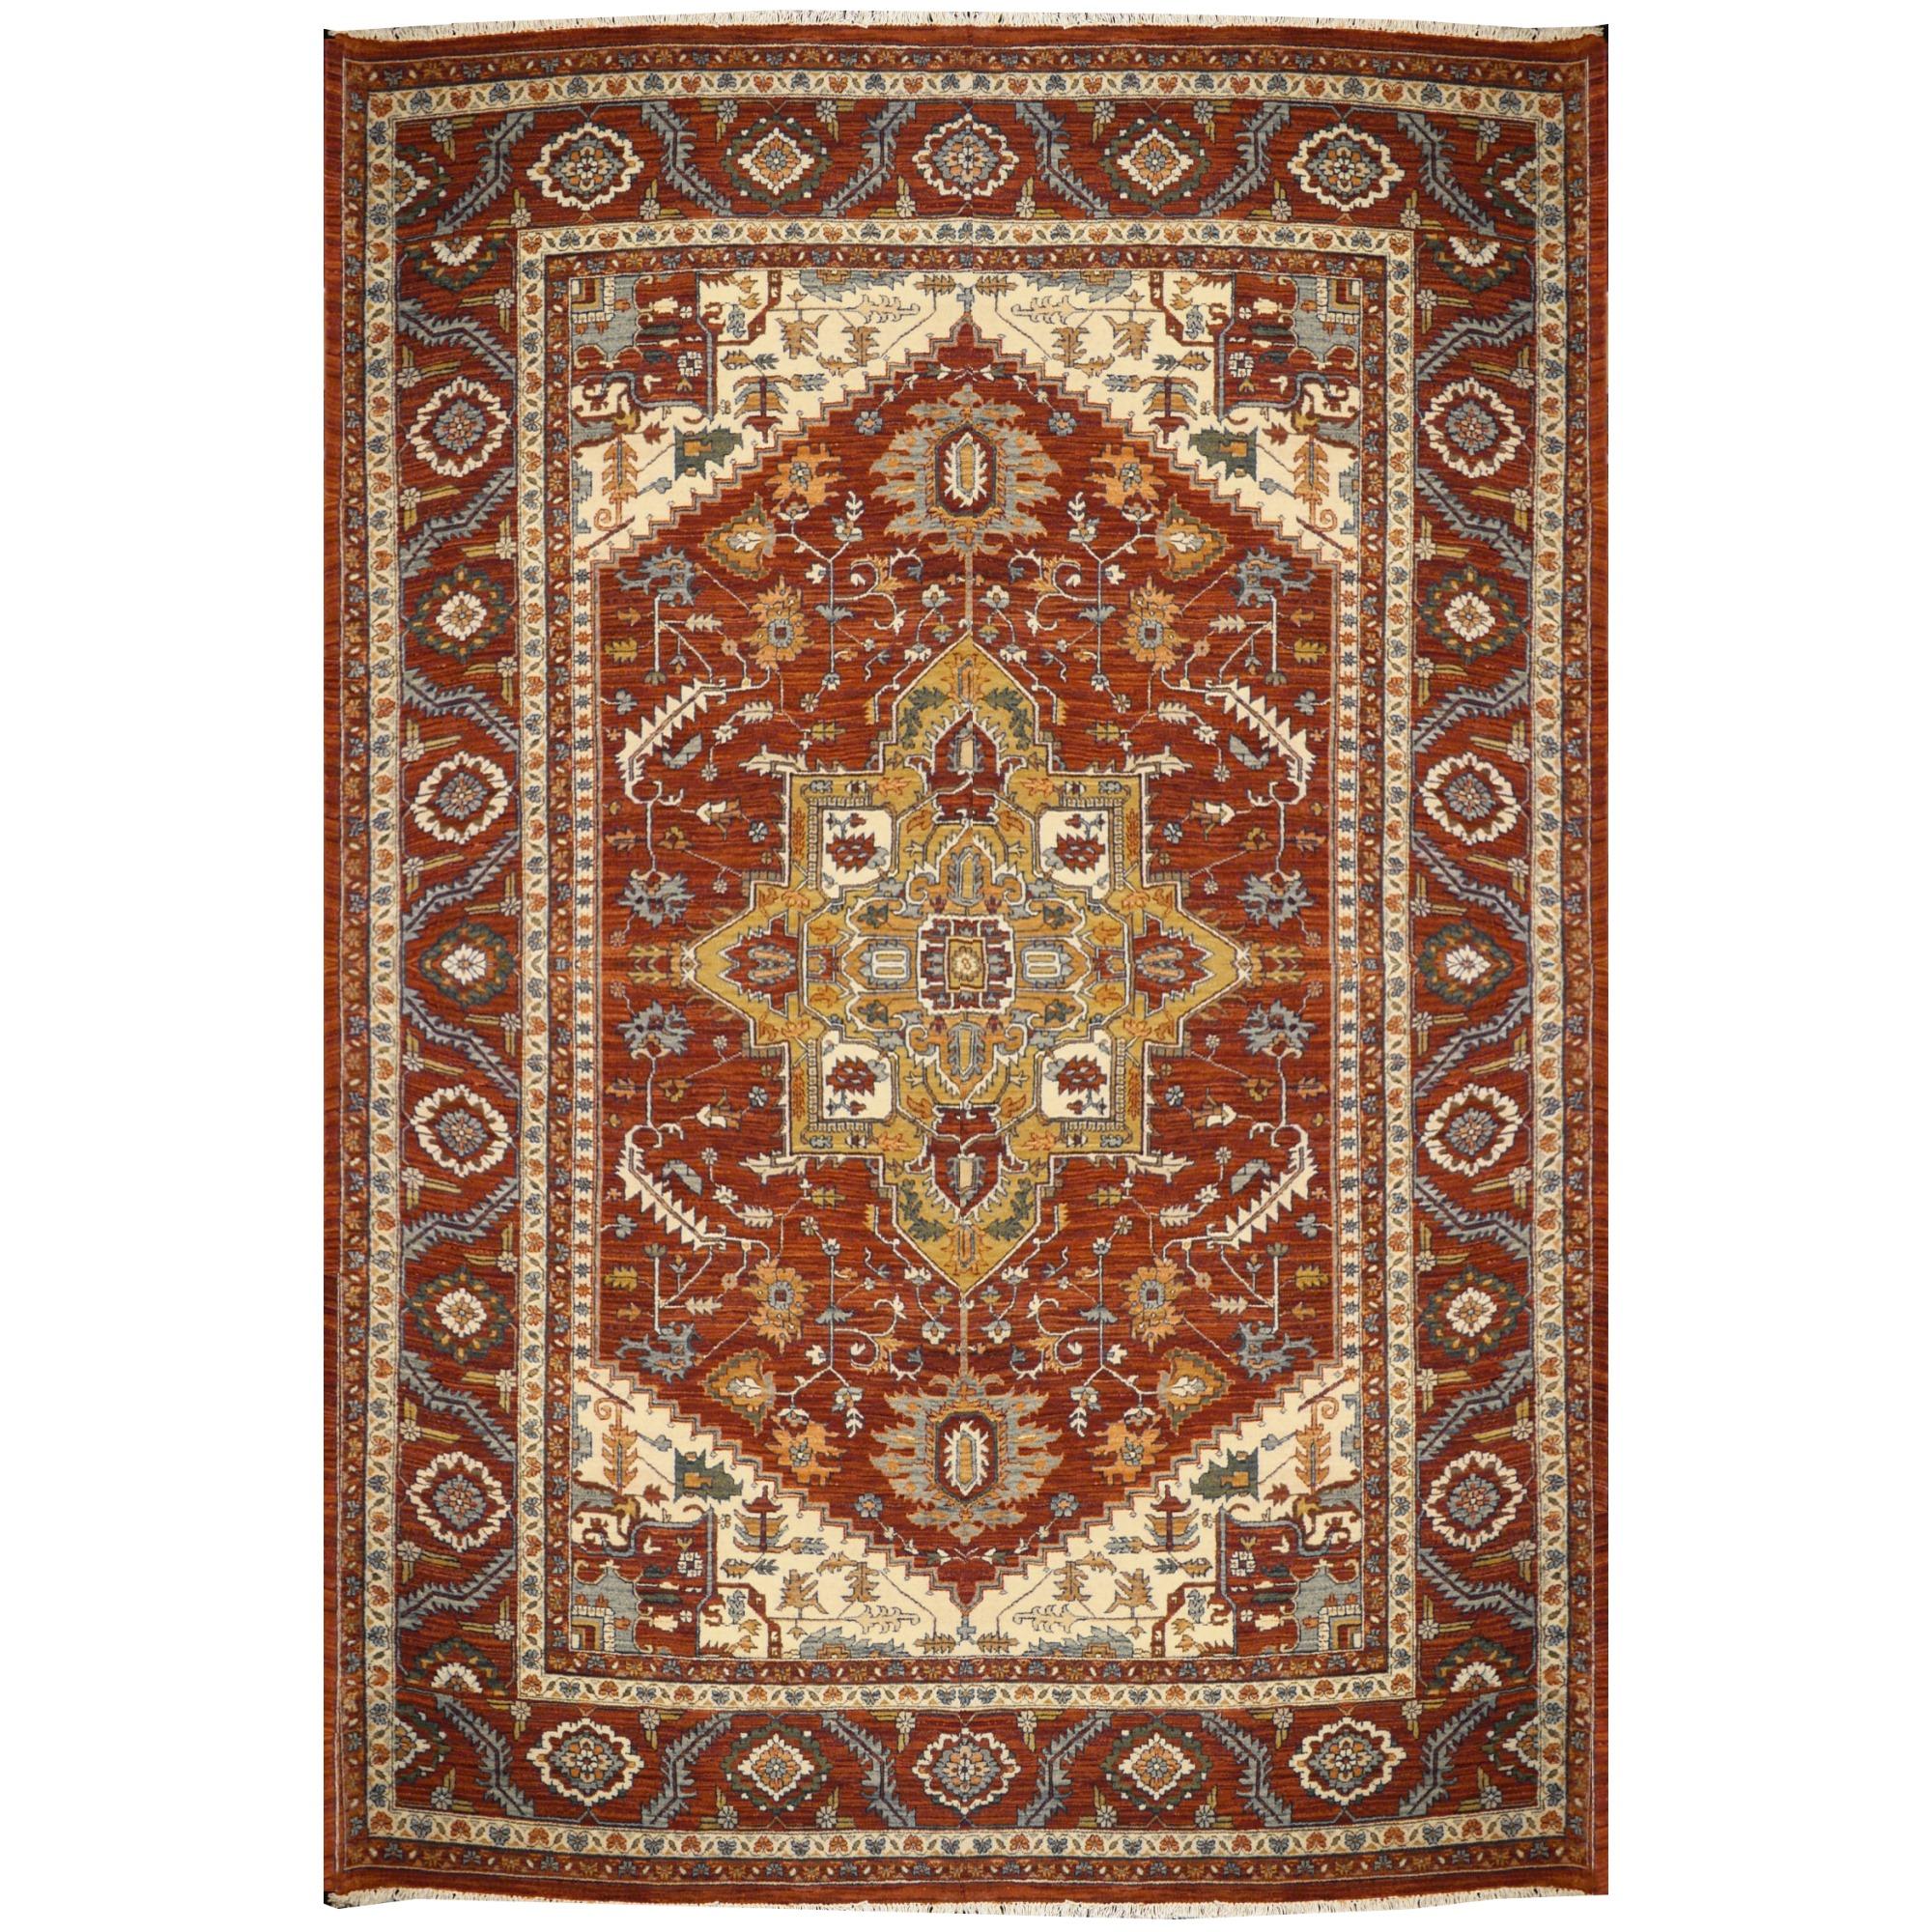 Heriz Rug room size area Serapi carpet
What is a Heriz rug?
Heriz rugs are named after the town Heriz in the Azerbaijan region. Heriz is located between the cities Tabriz and Ardebil and is an important center of persian rug making.
What do Heriz